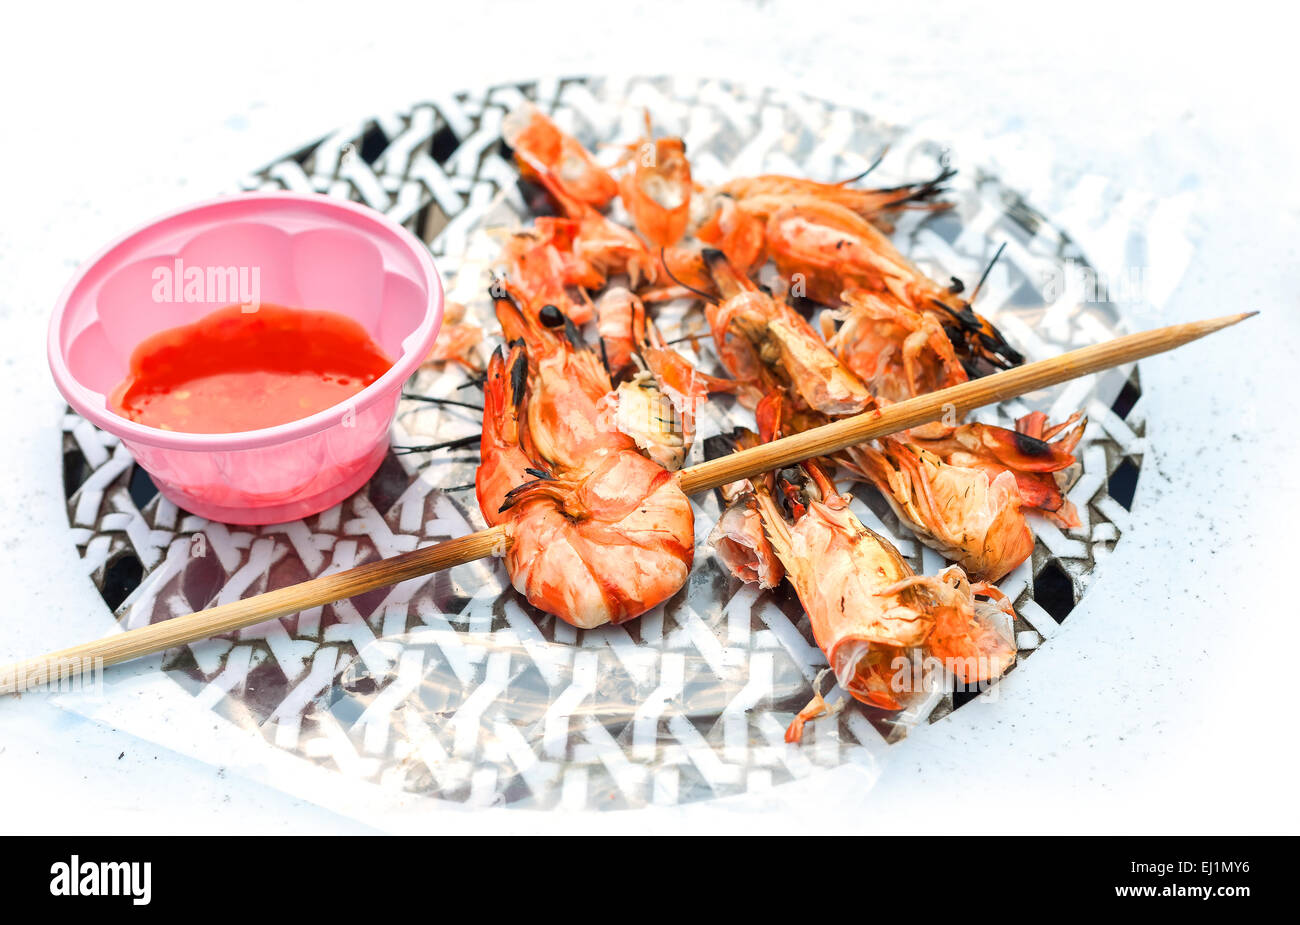 Grilled shrimps with sweet garlic chilli Sauce, street food. Stock Photo